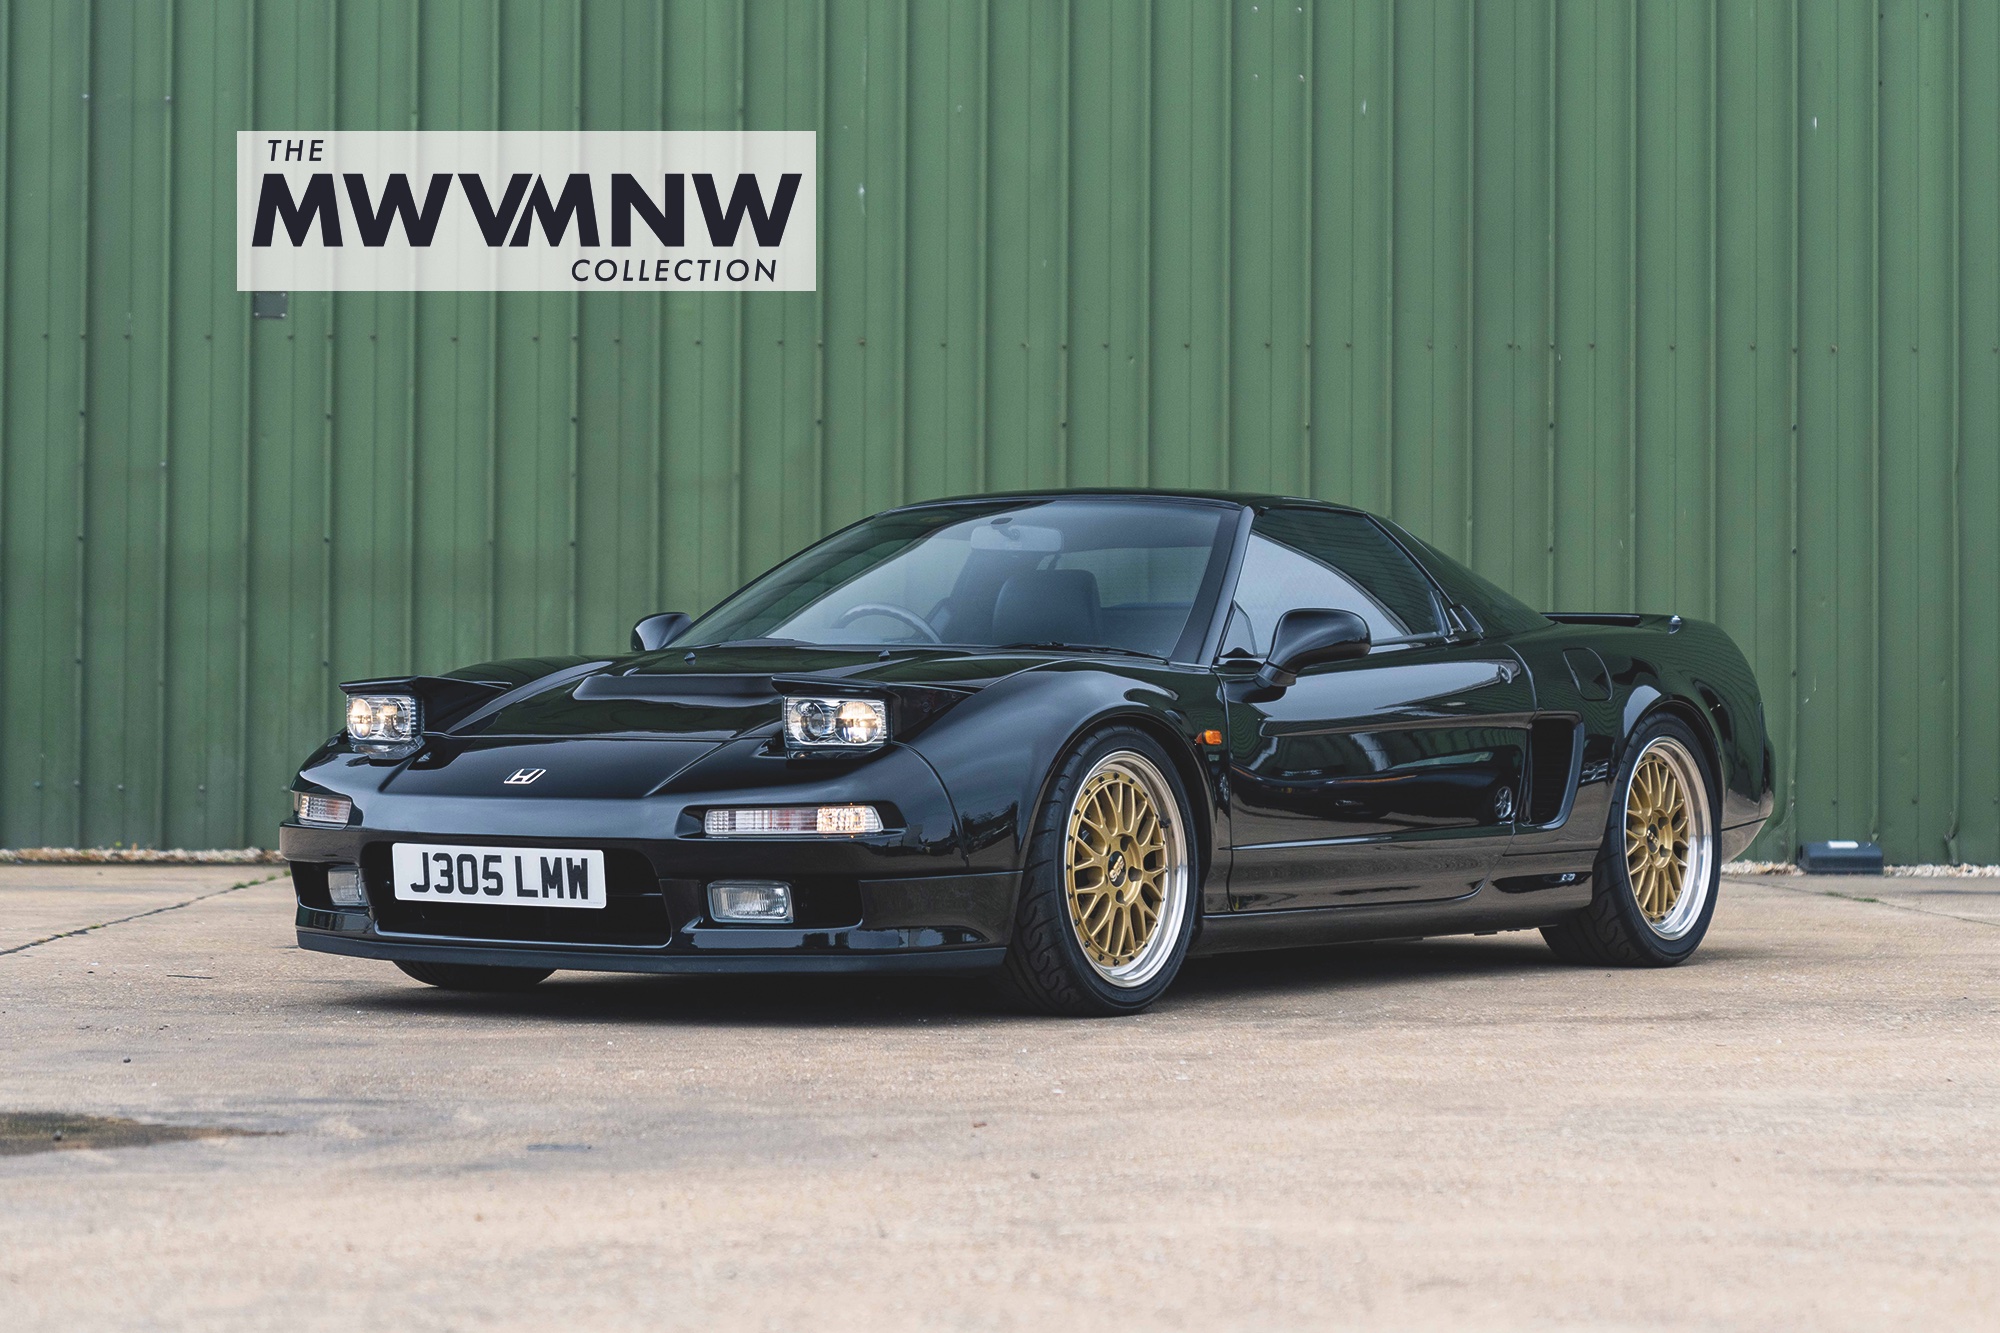 1992 HONDA NSX - 7,669 KM for sale by auction in Hampshire, United 